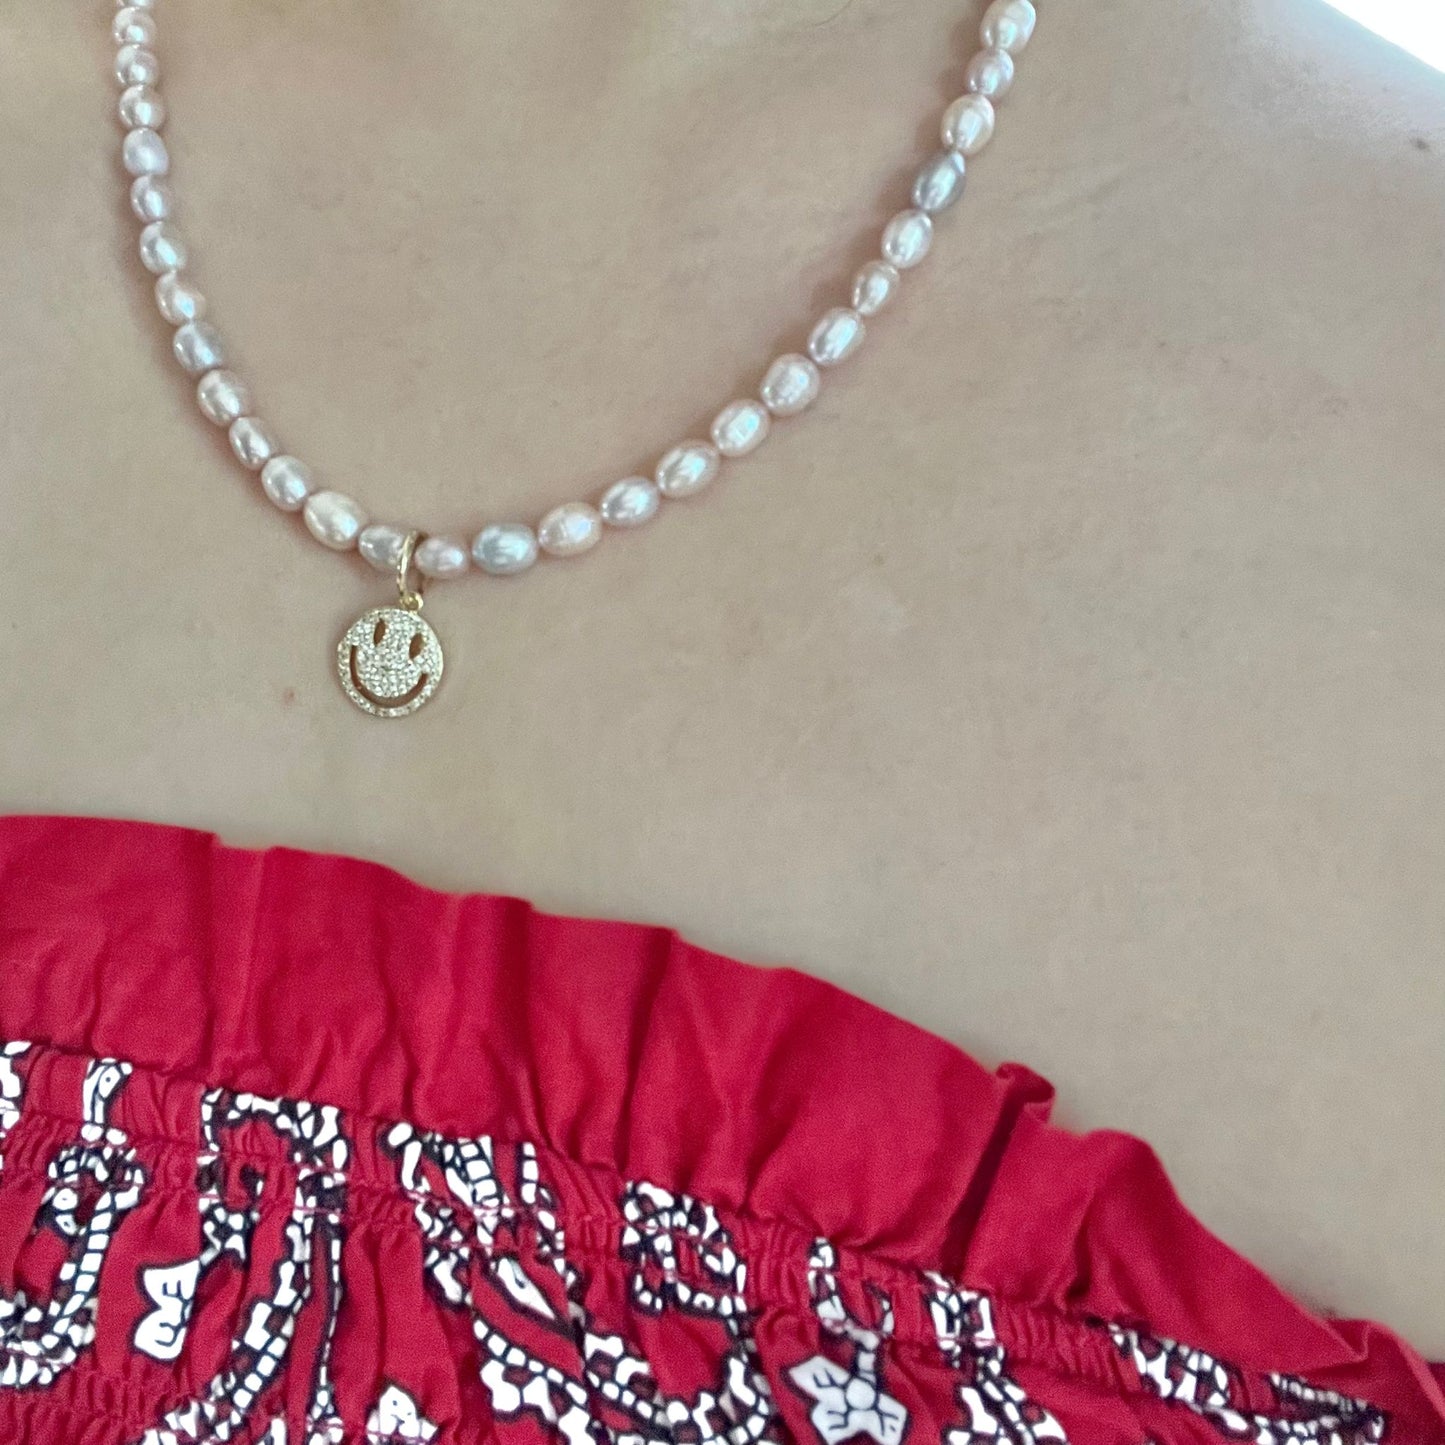 Lilac Pink Baroque Pearl Necklace - Smiley Face